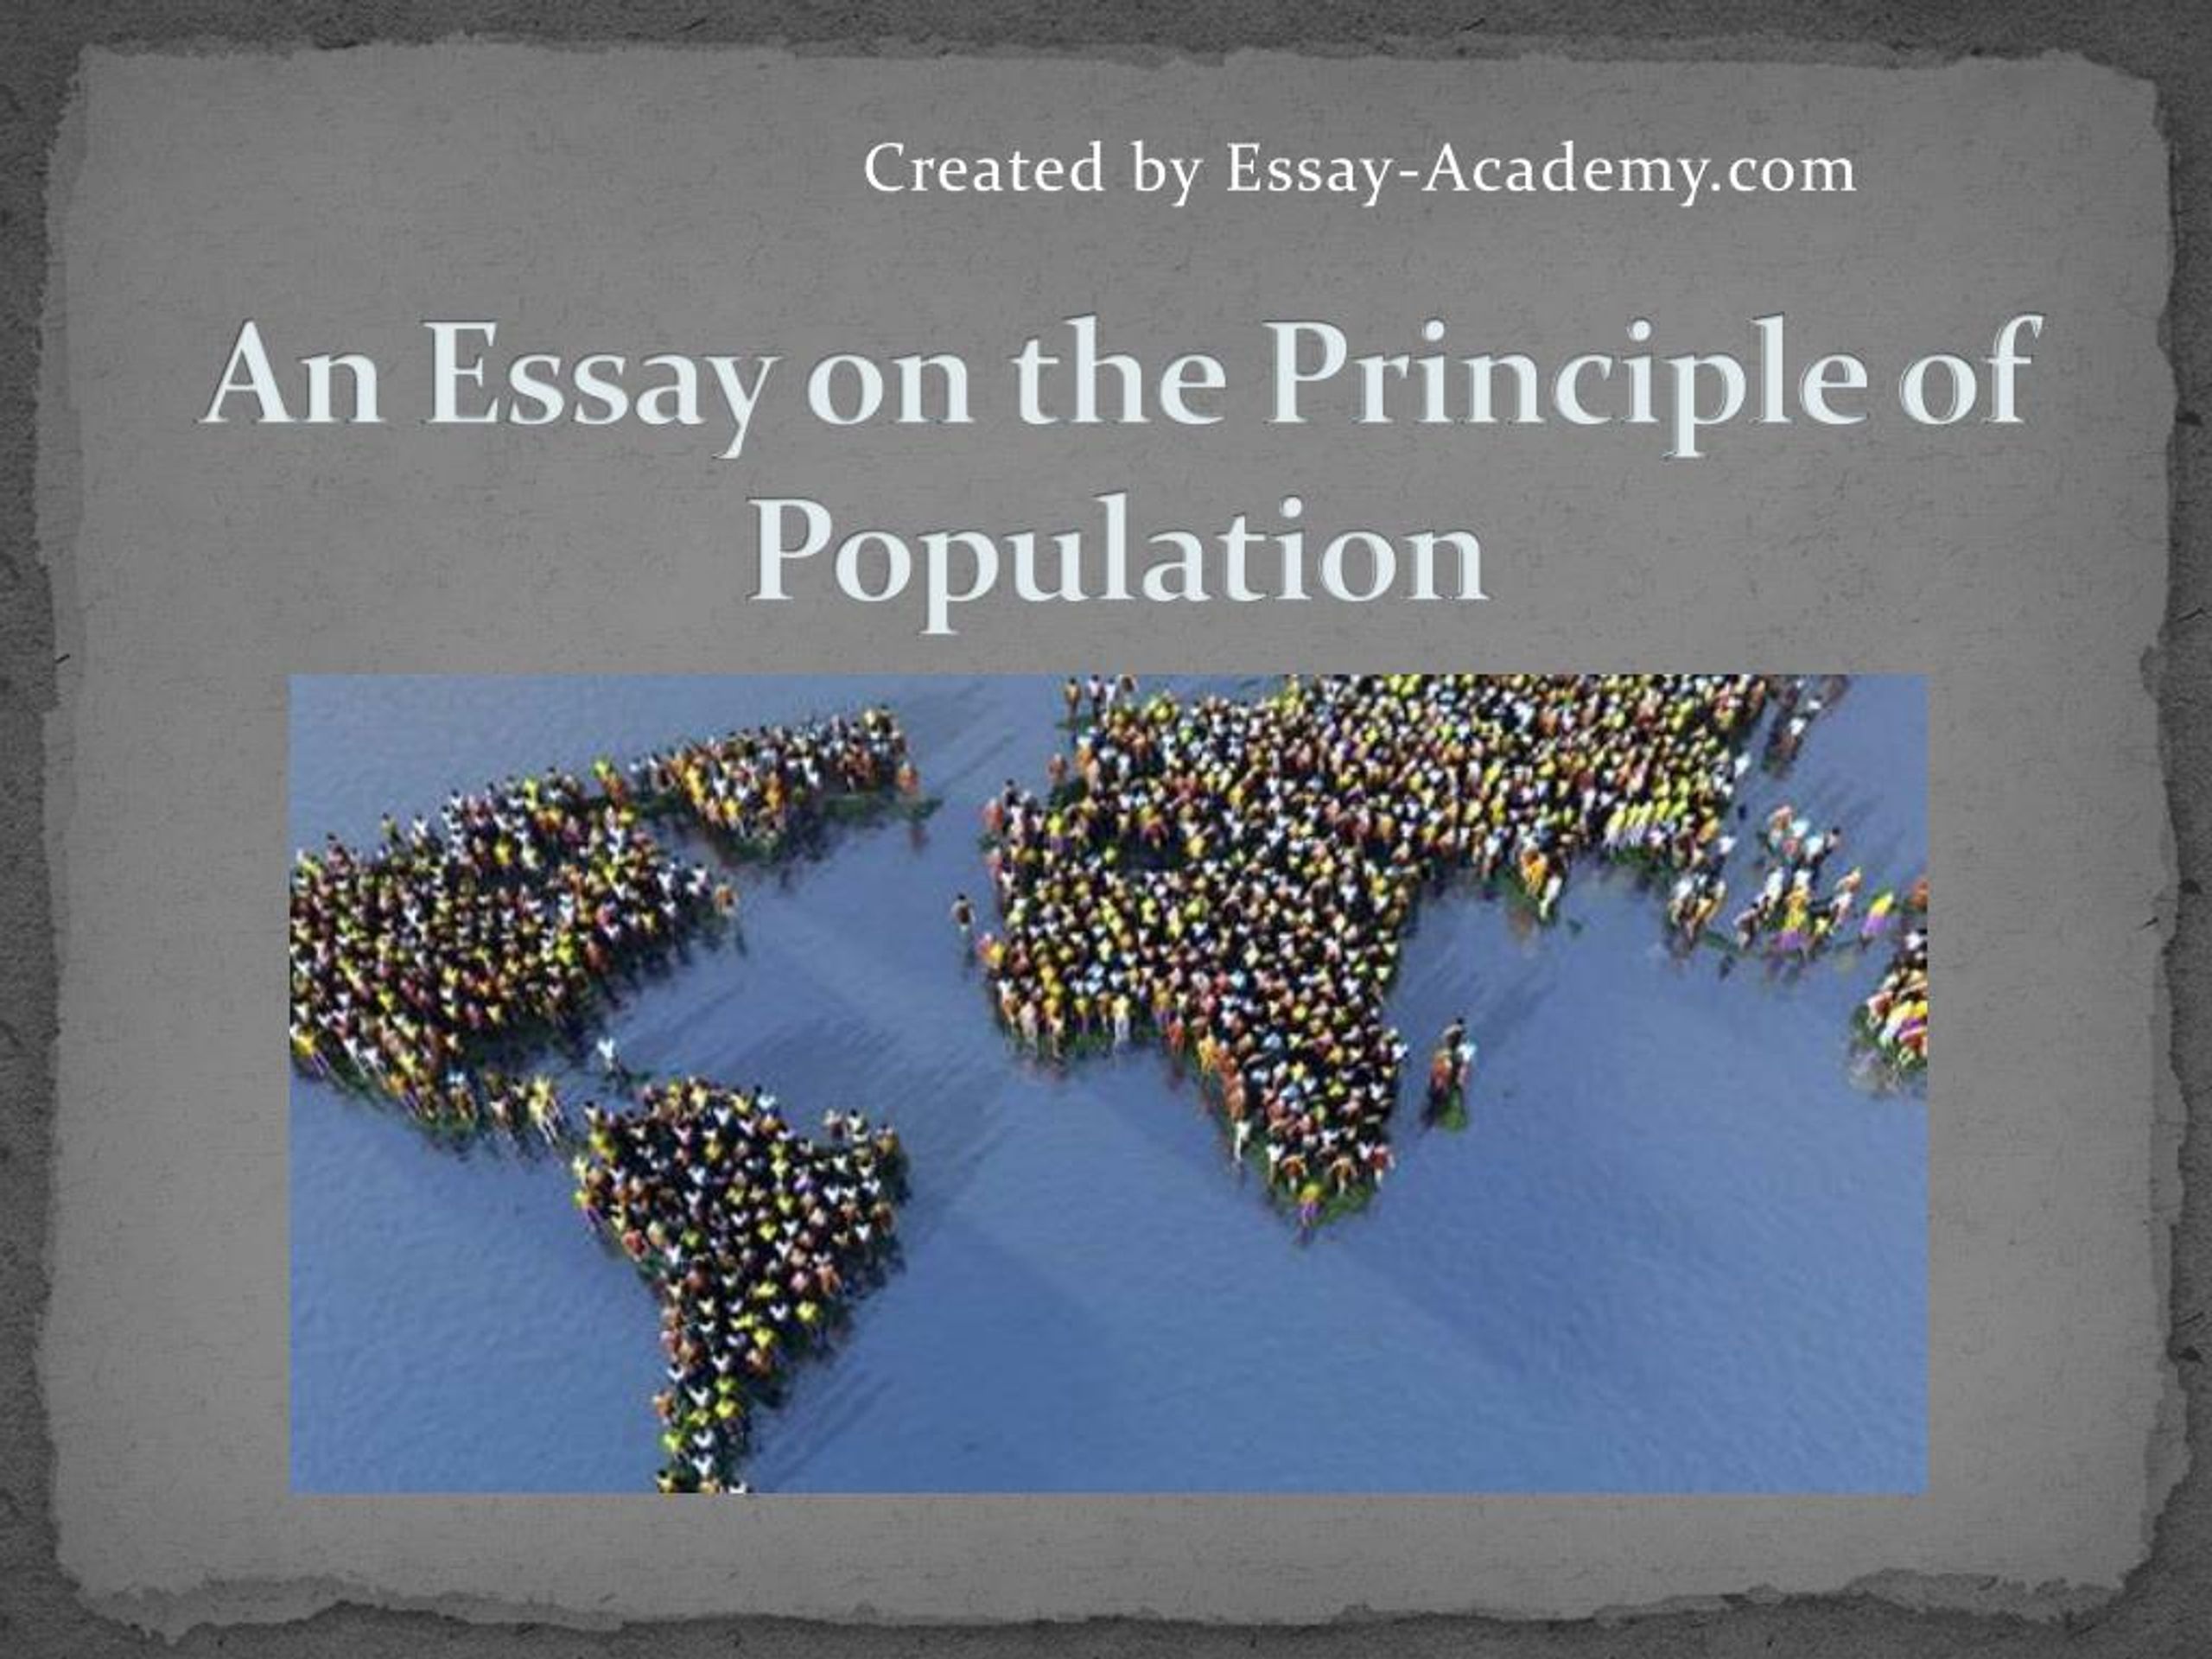 summary of an essay on the principle of population